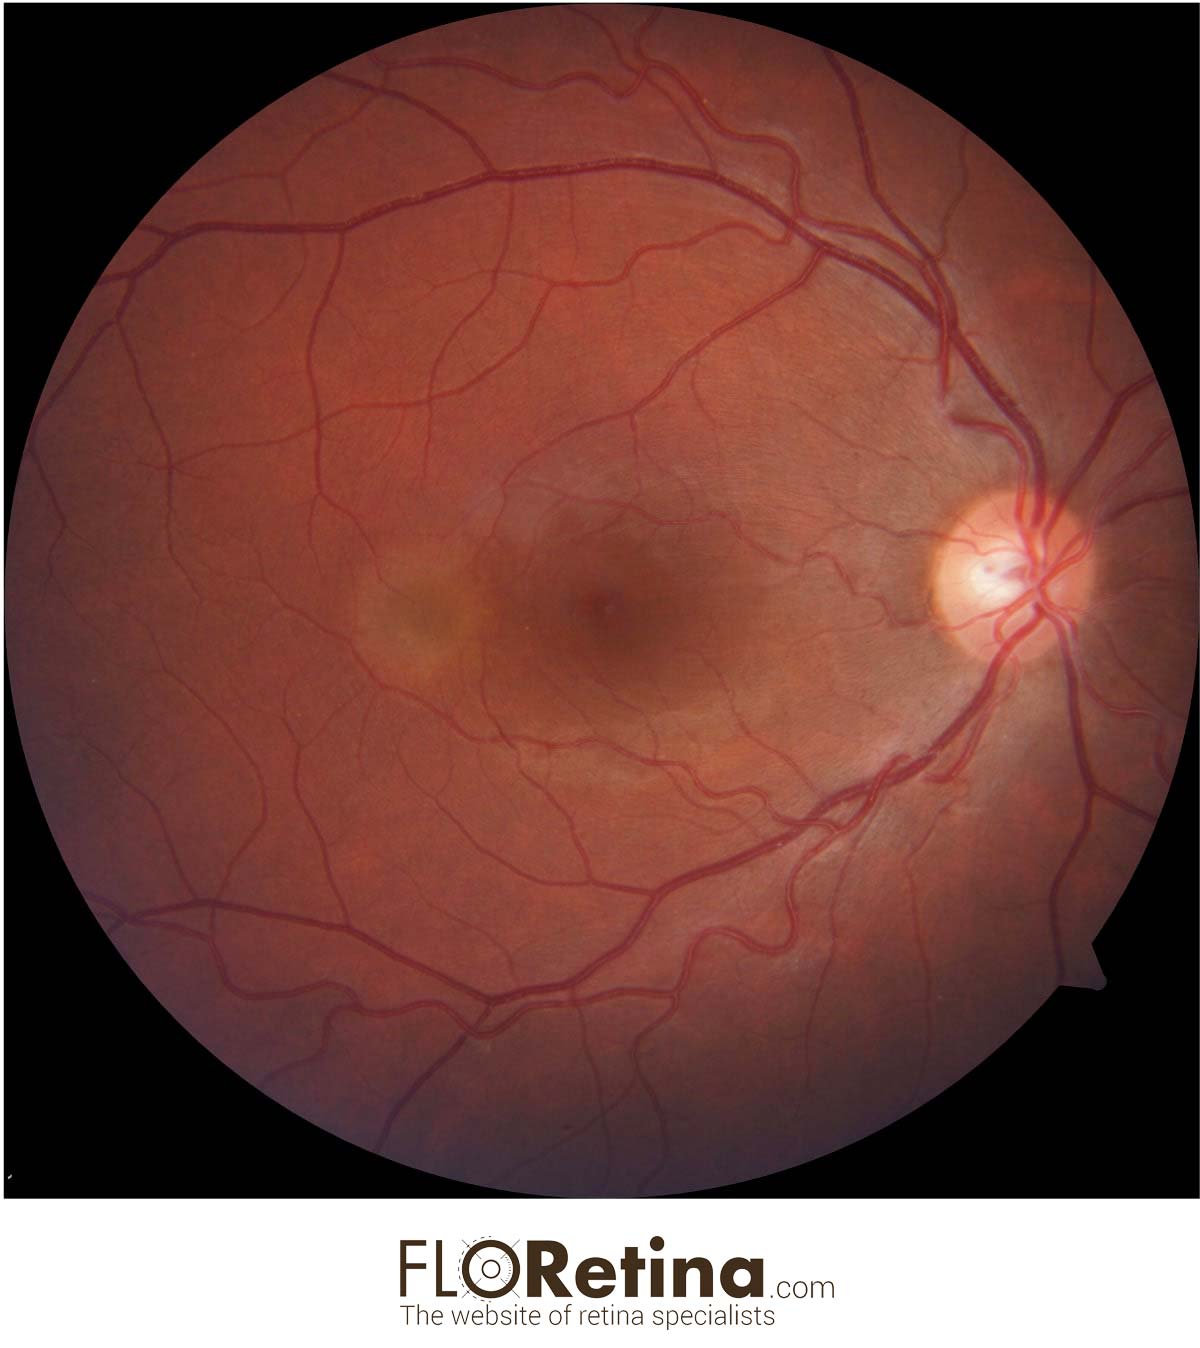 UNILATERAL ACUTE MACULOPATHY CAUSED BY COXSACKIEVIRUS